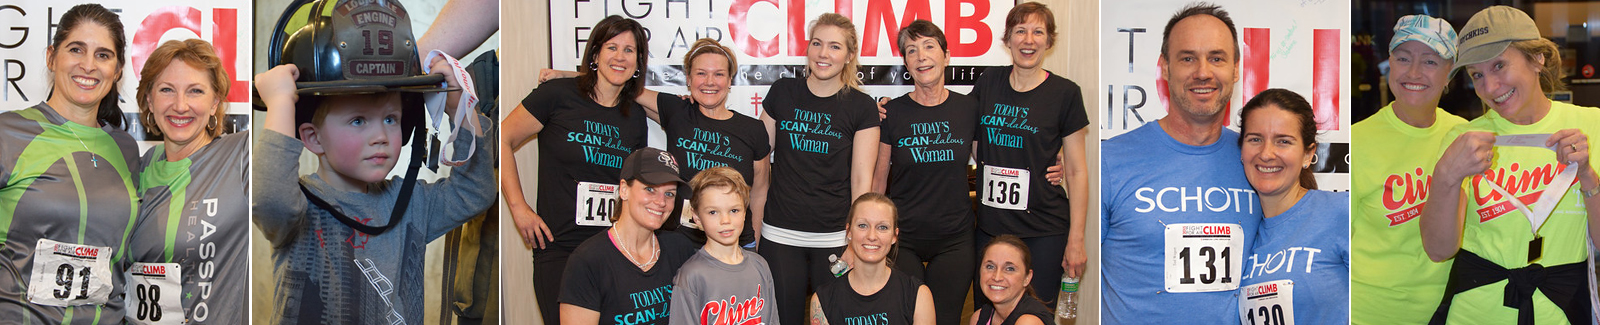 Fight For Air Climb - Louisville, KY. Step Up to the Challenge!